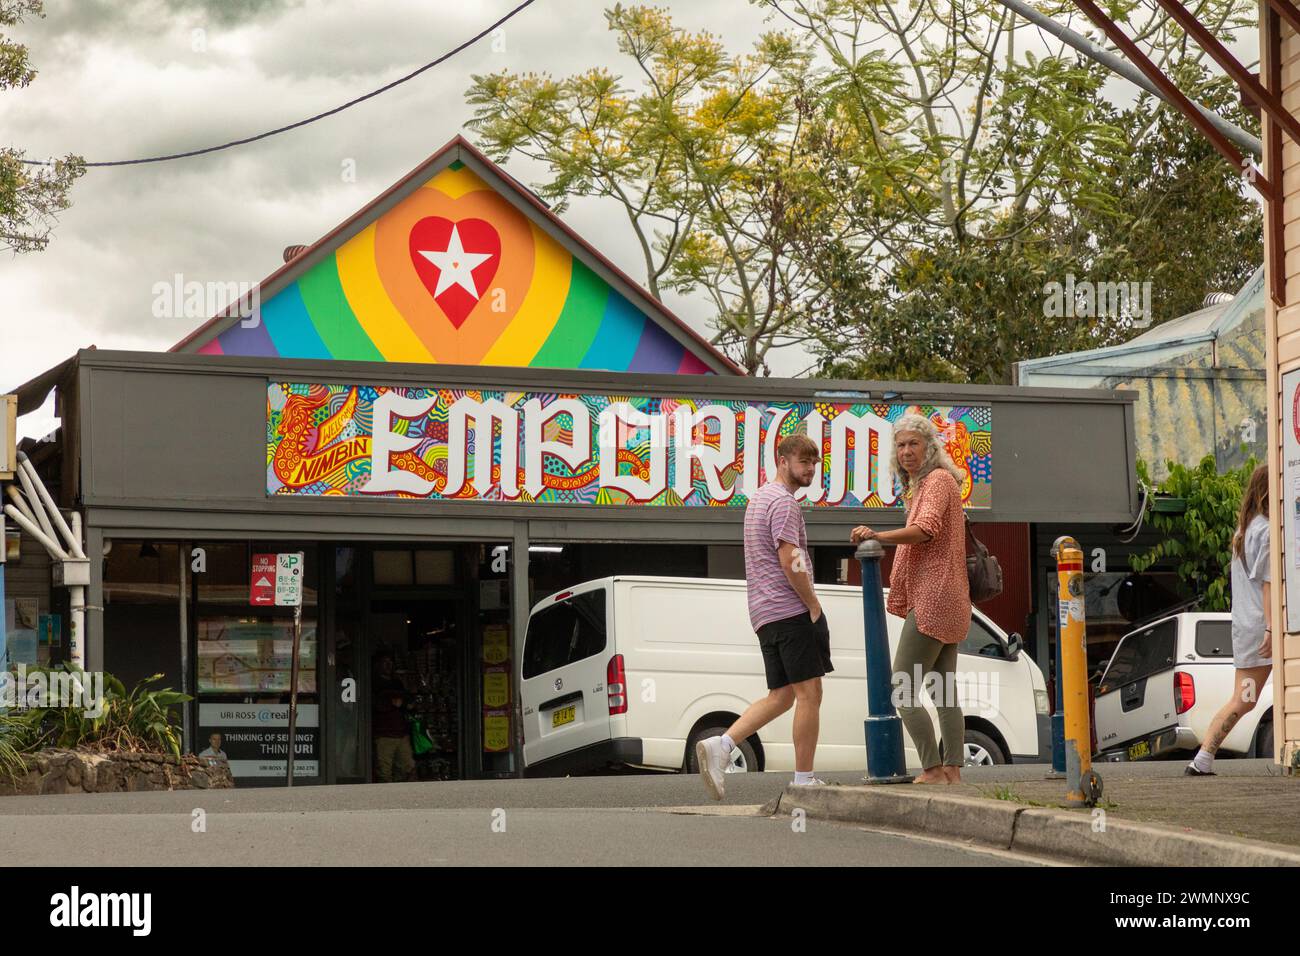 Part of the colourful main street in Nimbin, an artsy tourist town and renowned 'hippie' destination. Stock Photo